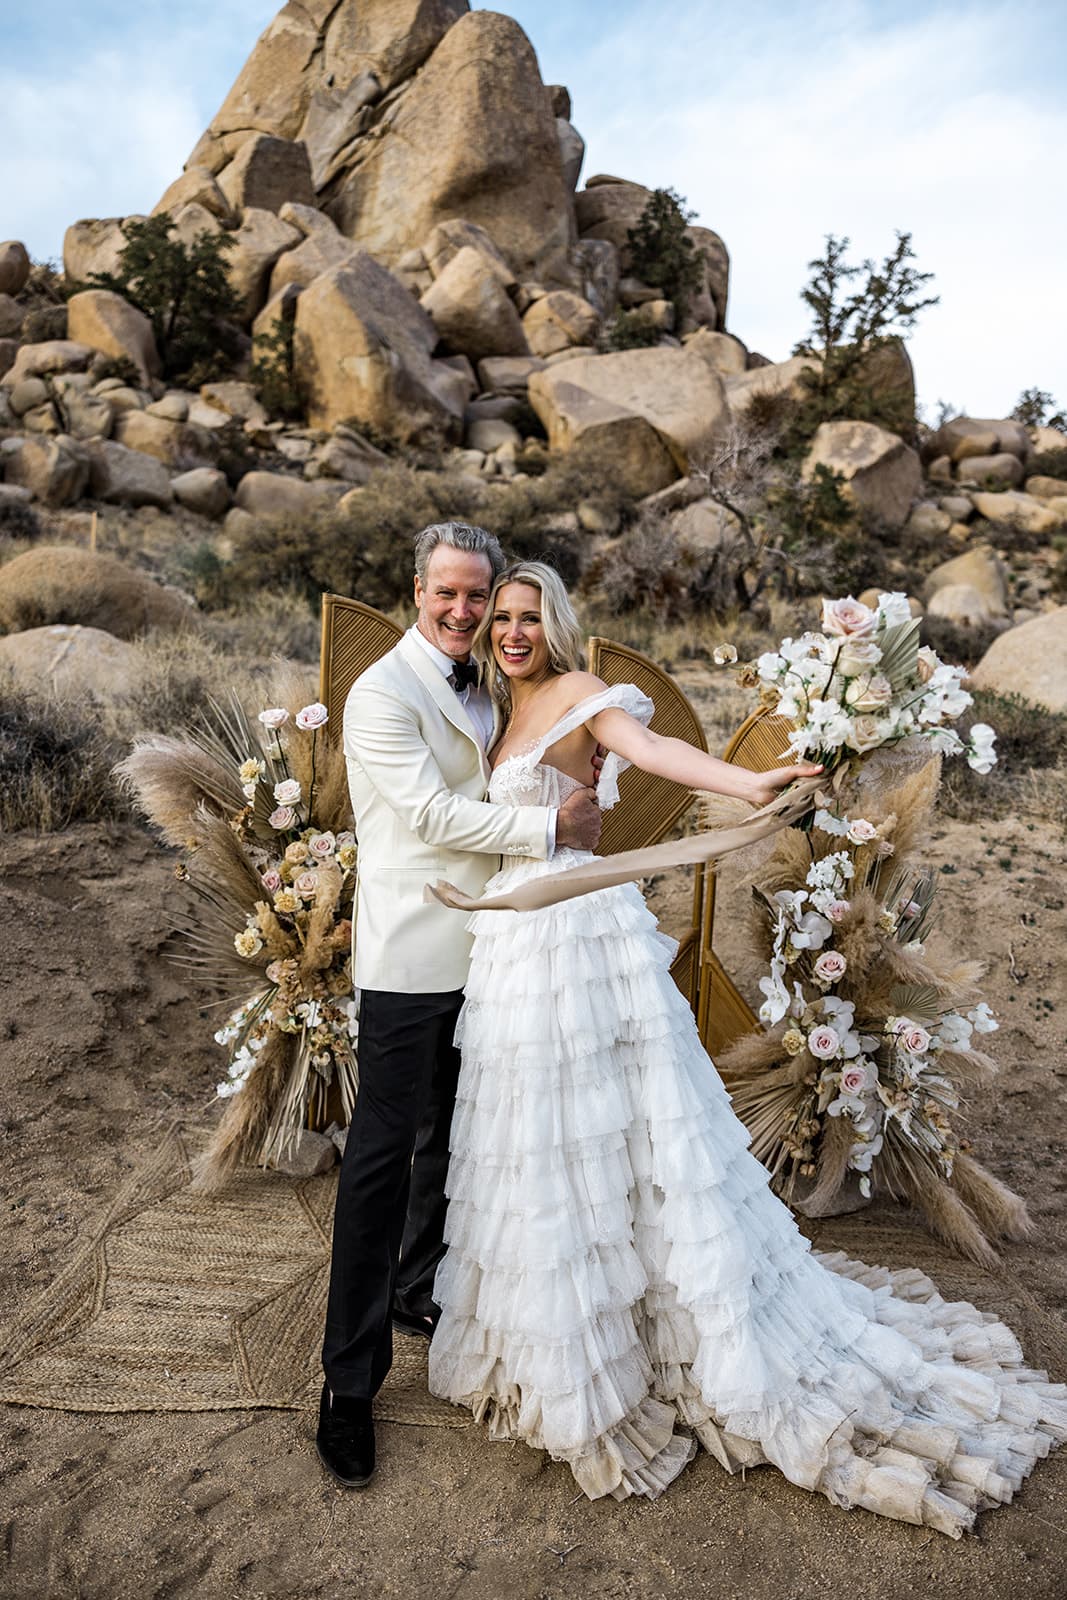 Bride and groom hold each other after getting married during Joshua Tree wedding